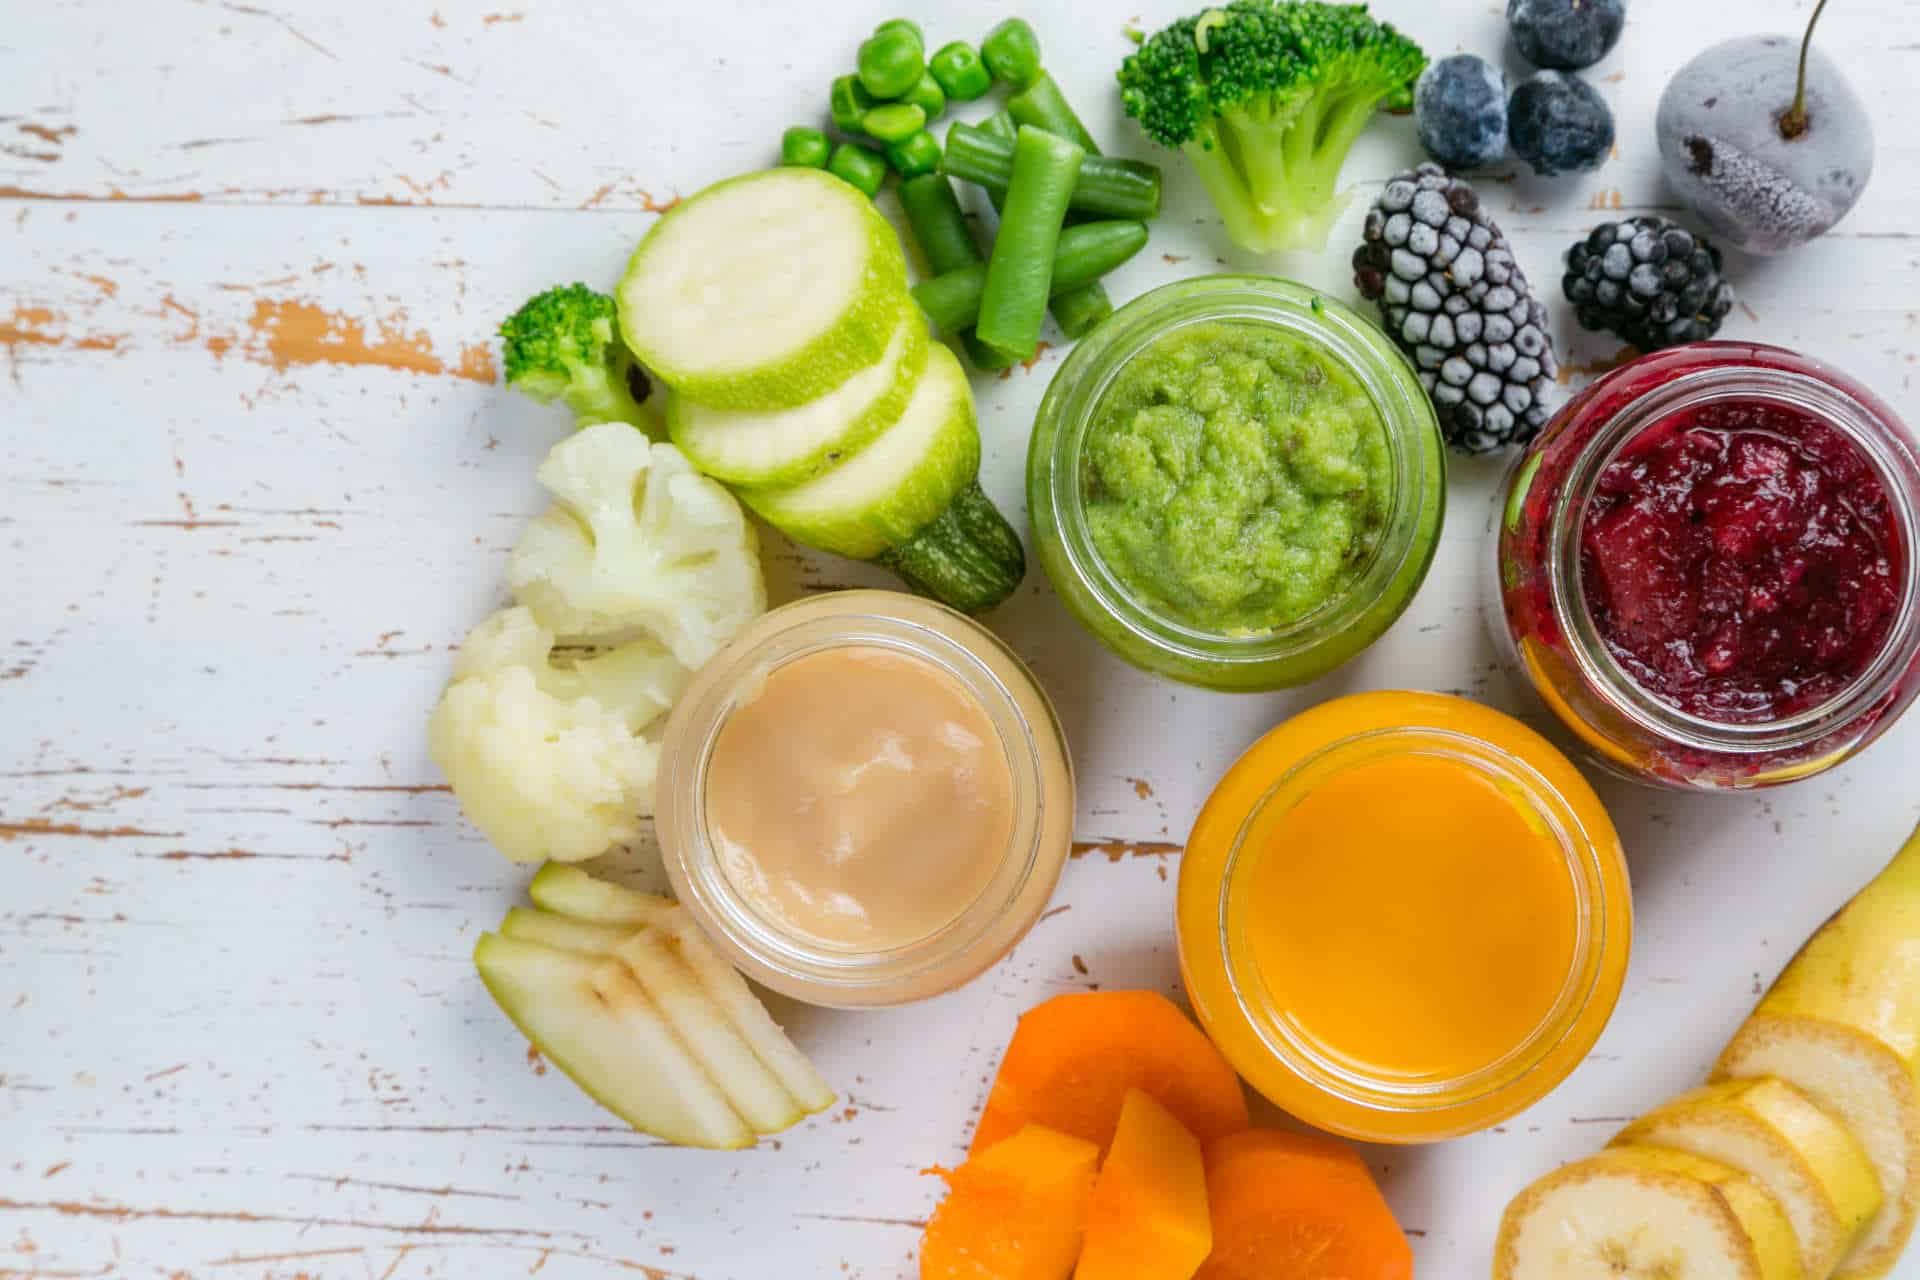 Organic Baby Food Market 2021-2026: Global Size, Share, Trends and Forecast Report 